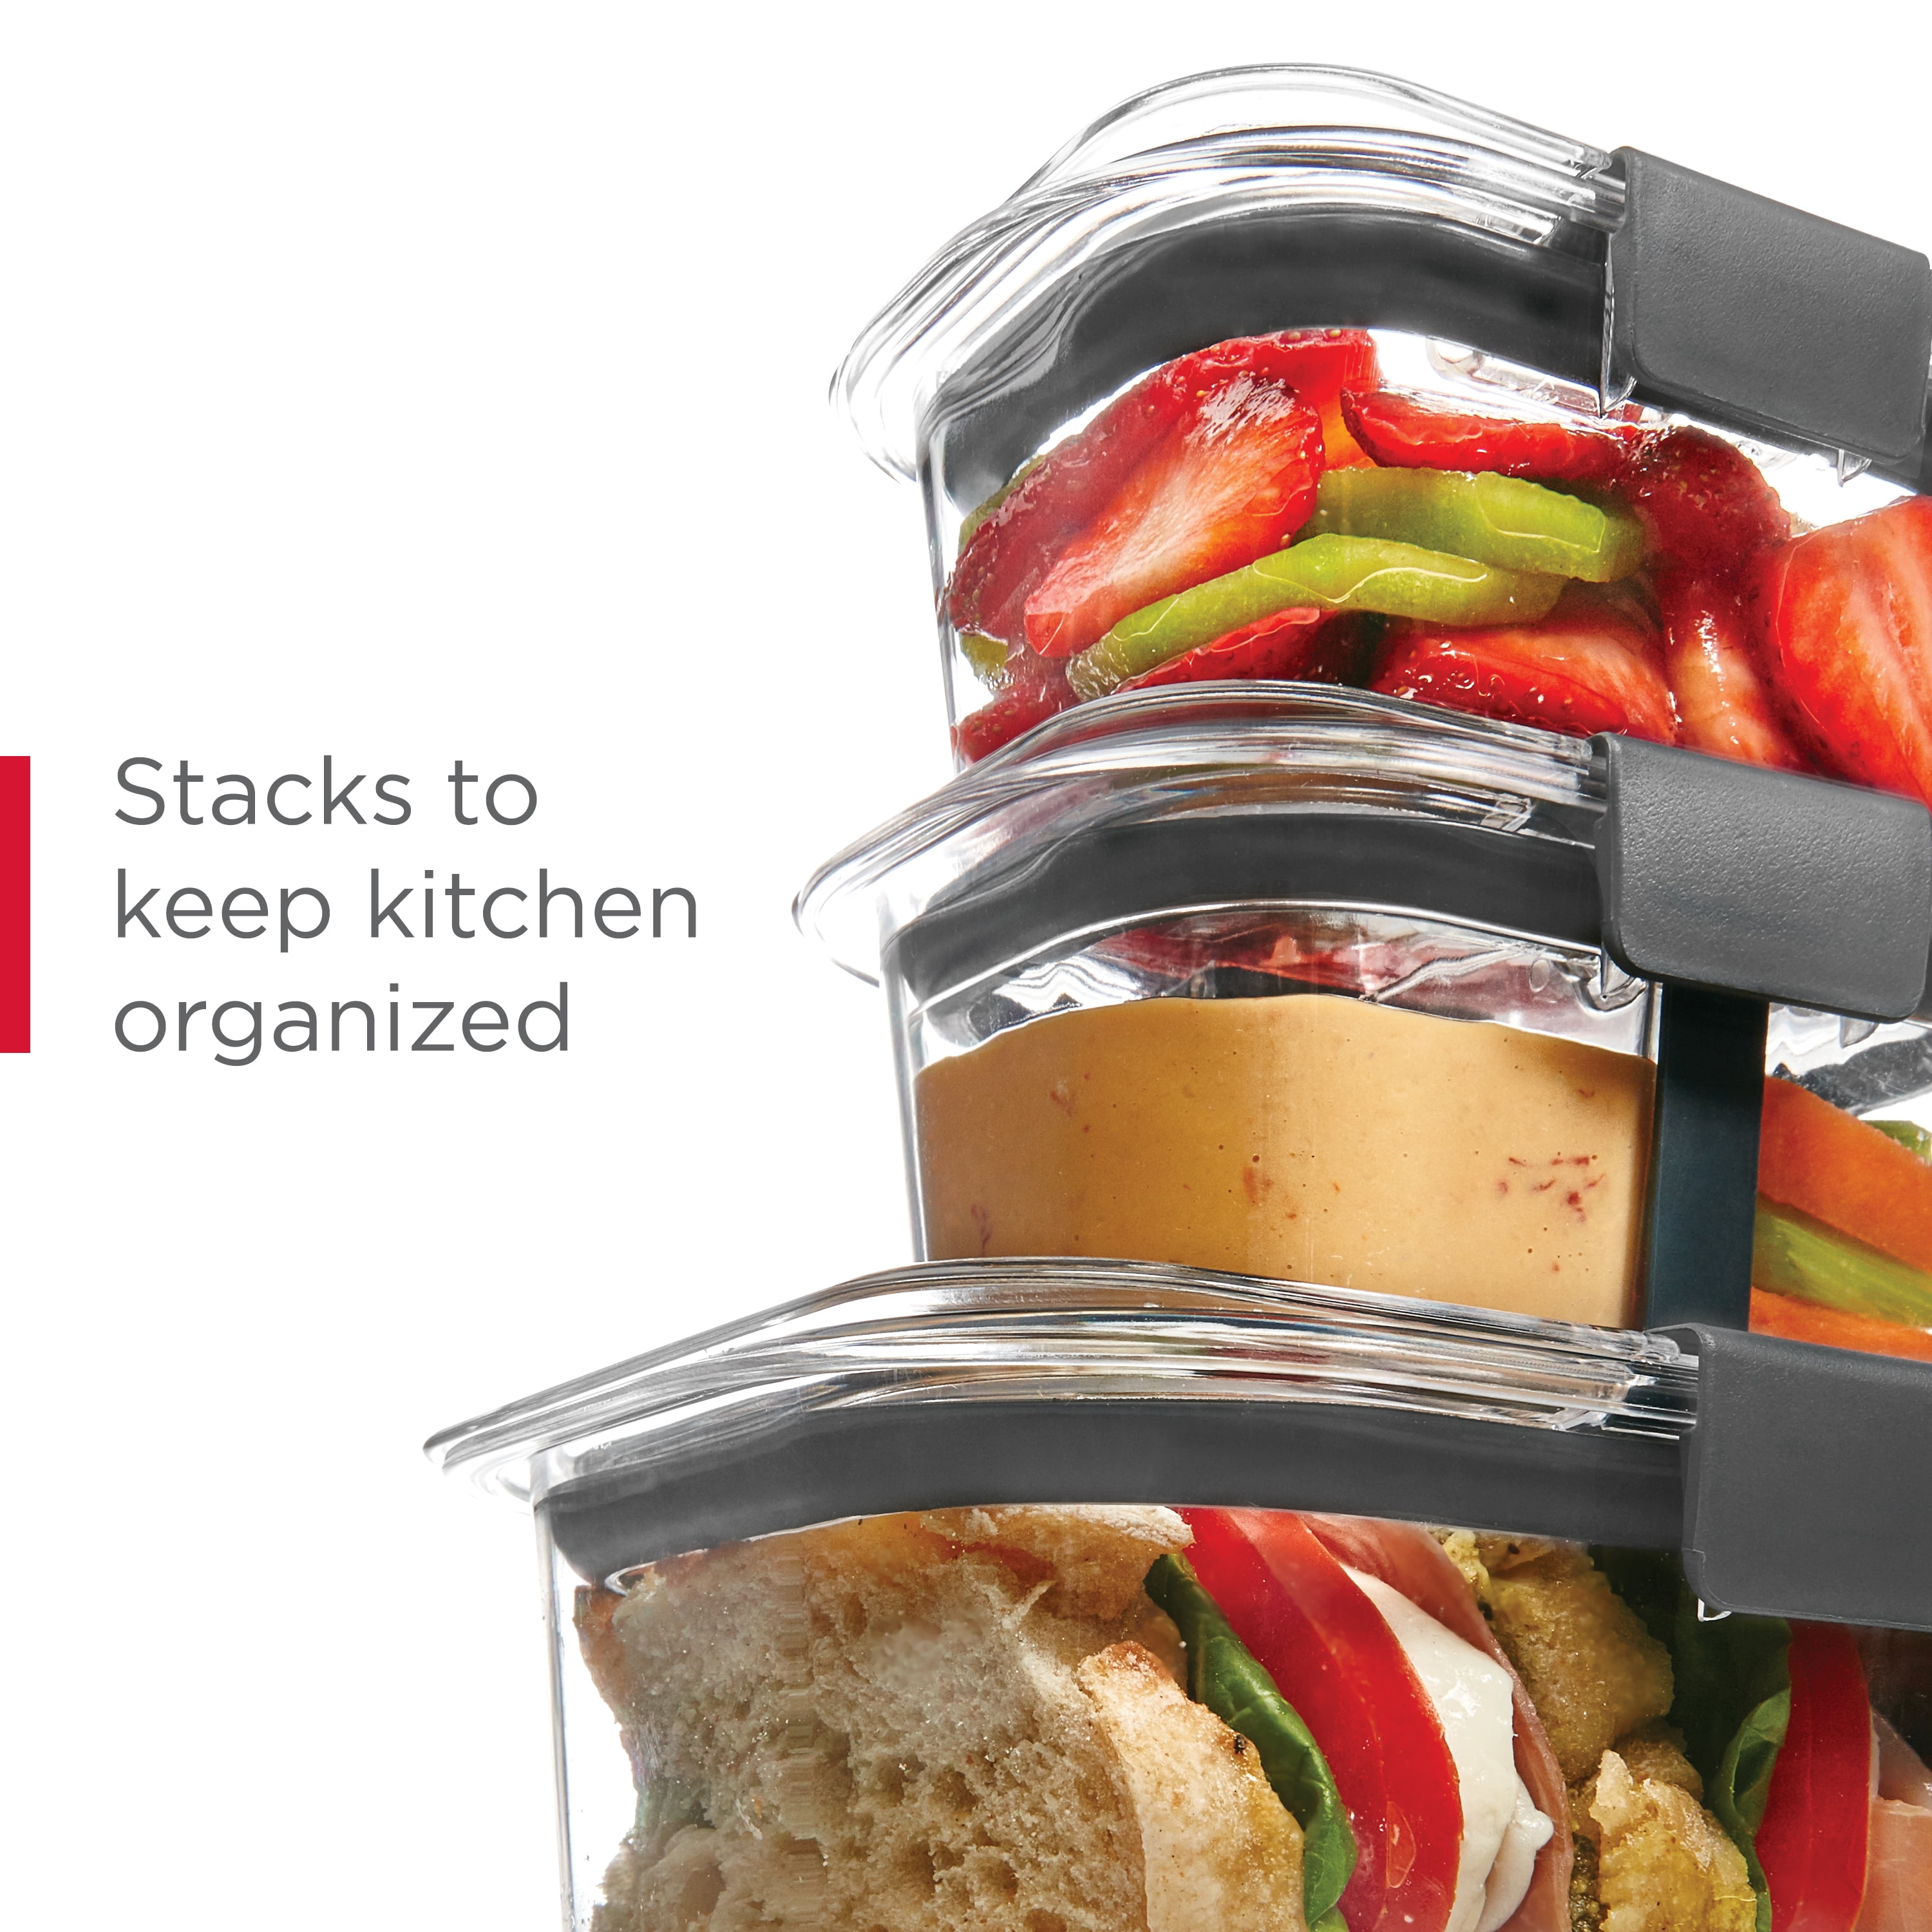 Rubbermaid Brilliance Leak-Proof Stackable Food Storage Containers